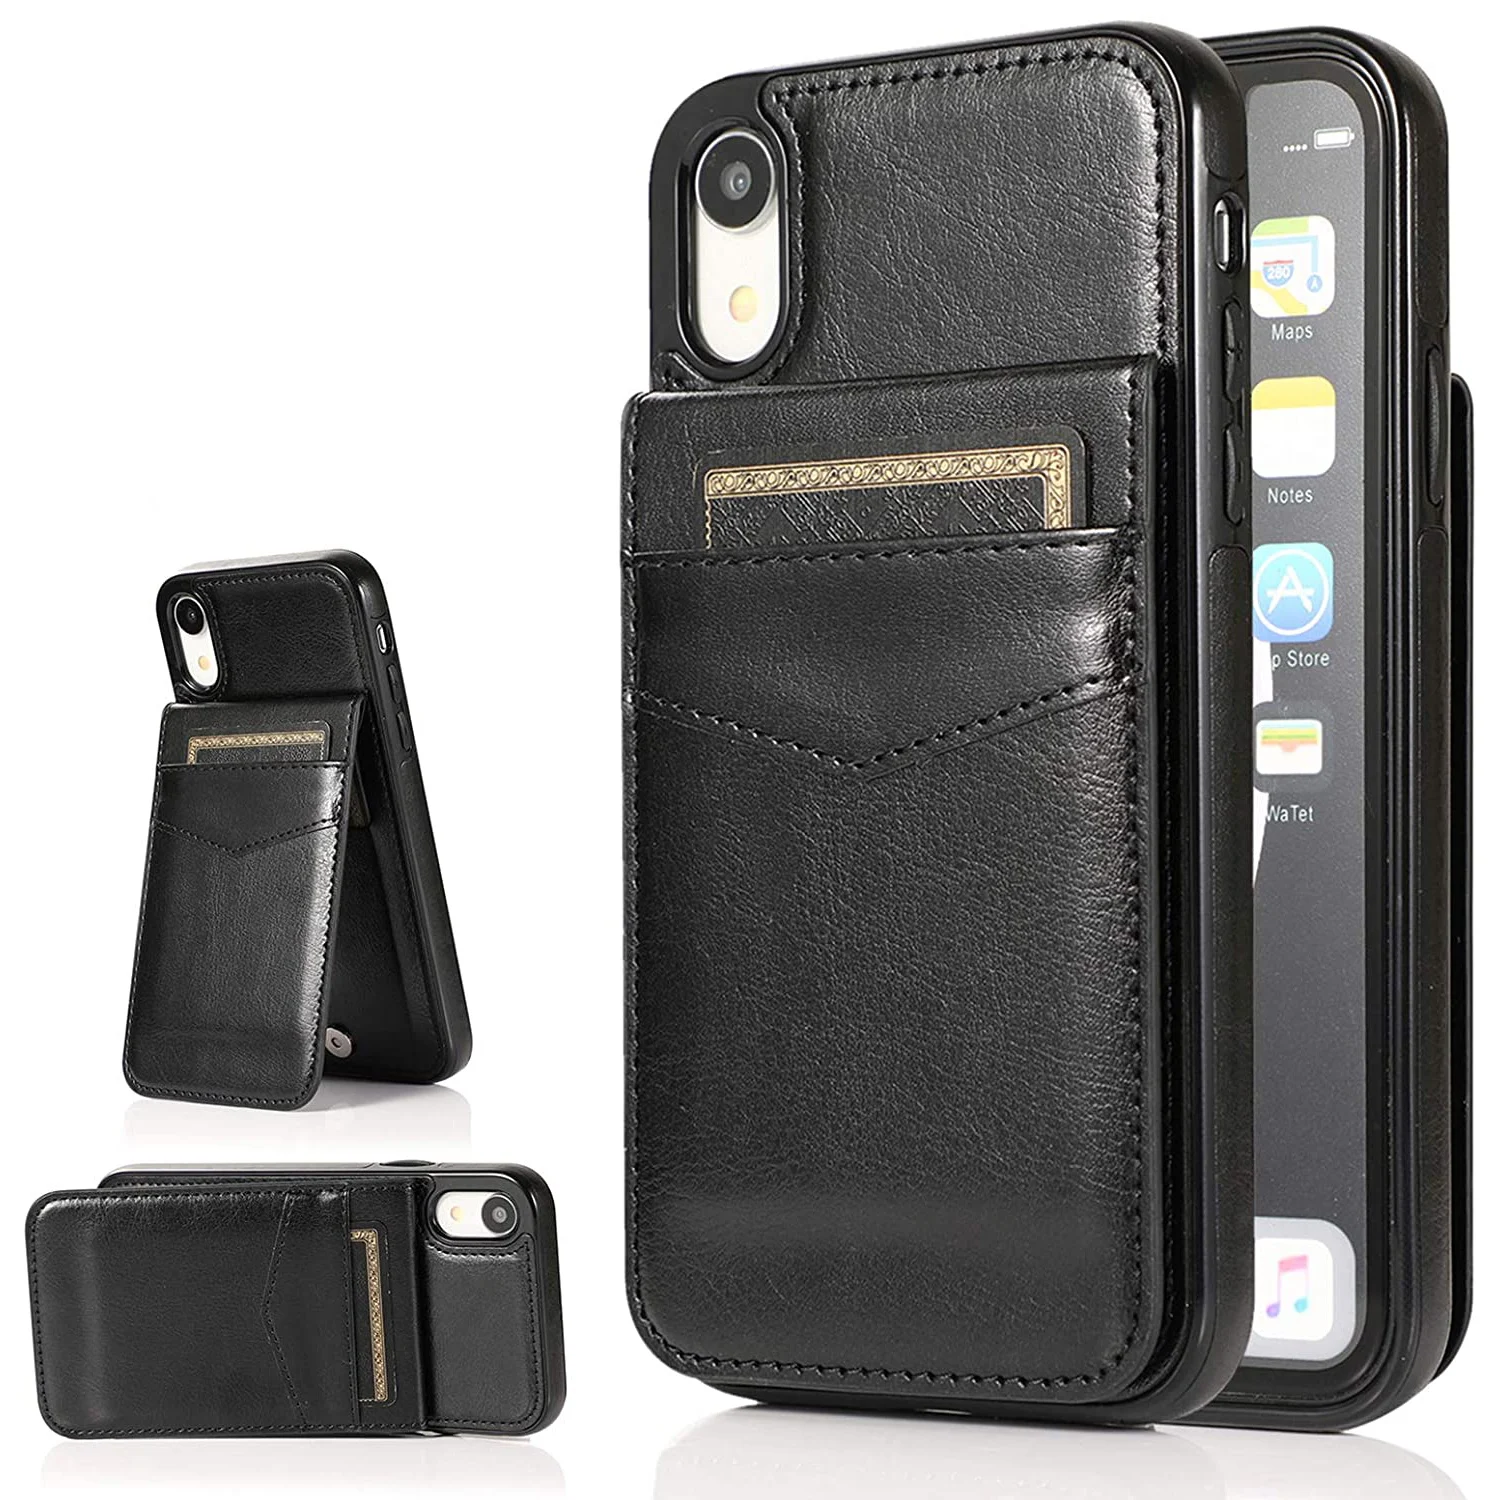 Phone Case for iPhone XR Card Holder Wallet Cover Stand Leather Cell iPhoneXR iPhone10R i Phonex 10XR 10R 10 R RX CR iPhoneXRMen